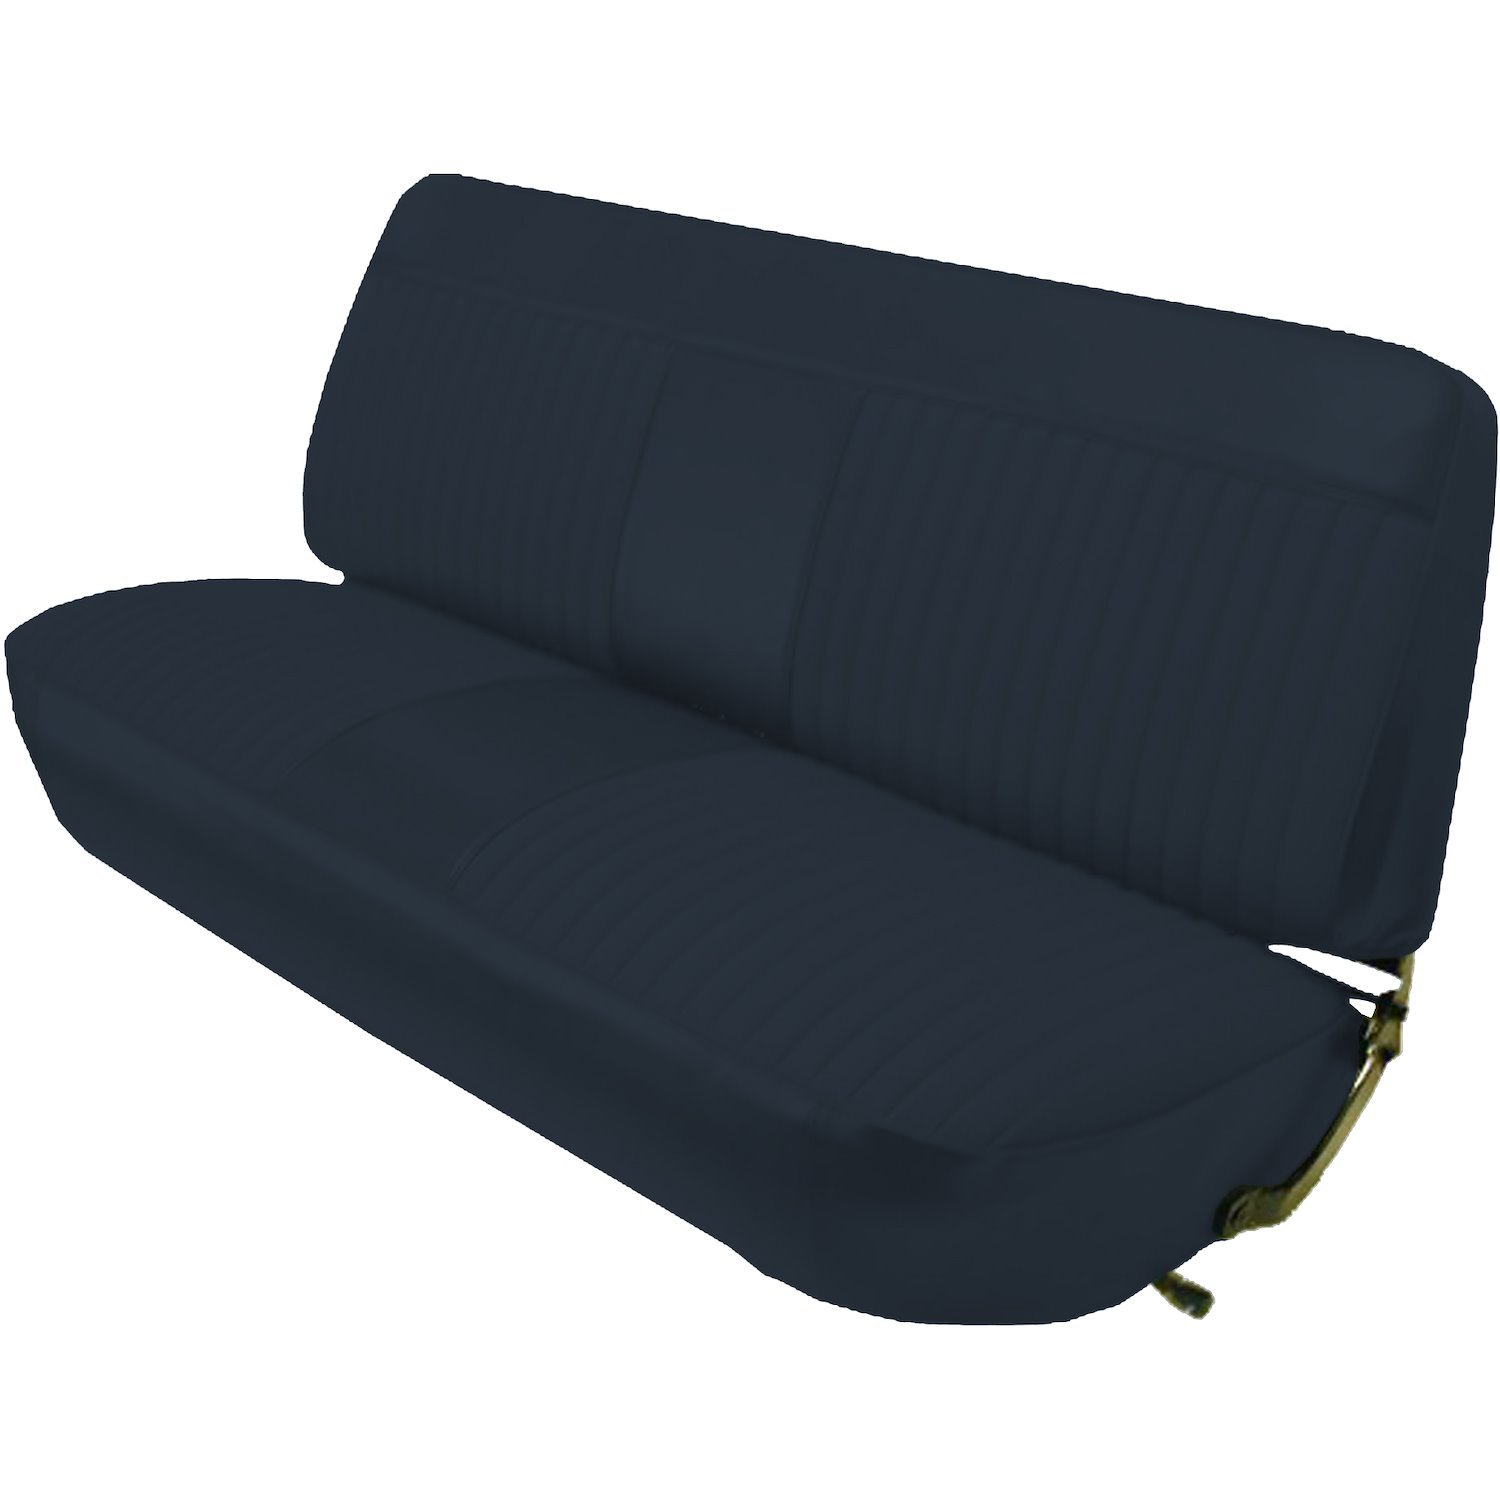 Seat Upholstery Kit 1973-1979 Ford F150 - Standard Cab - 1976-1979 Ford F250 - Crew Cab - Navy Blue Vinyl